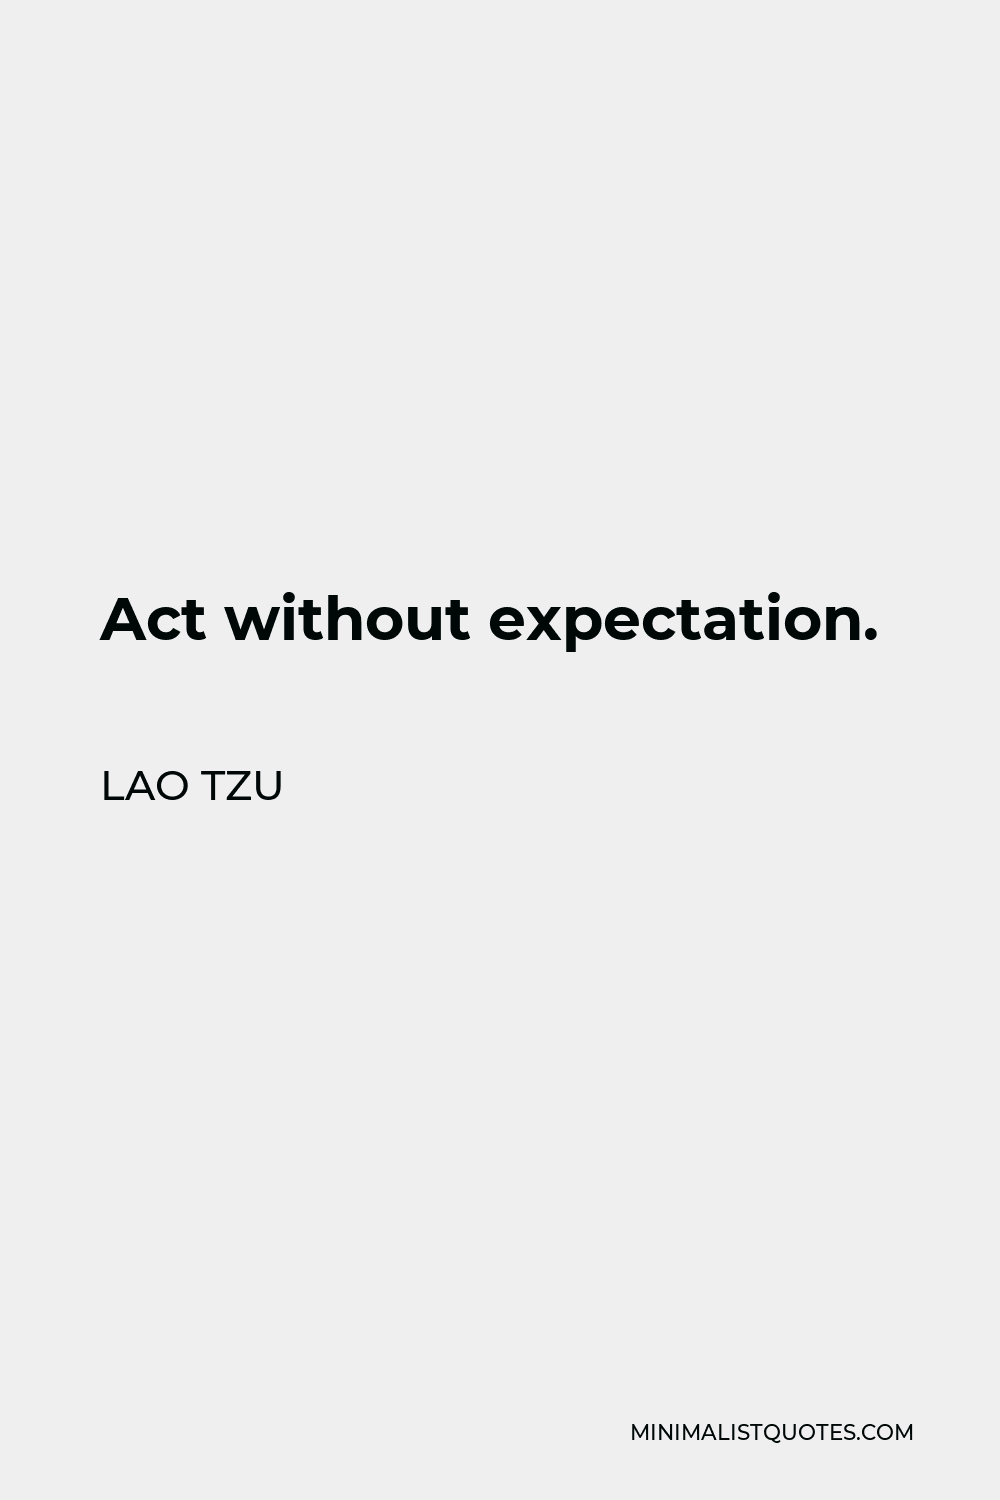 Download wallpapers Stop thinking and end your problems Lao Tzu quotes  retro style popular quotes motivation problem quotes inspiration  purple retro background purple stone texture for desktop free Pictures  for desktop free